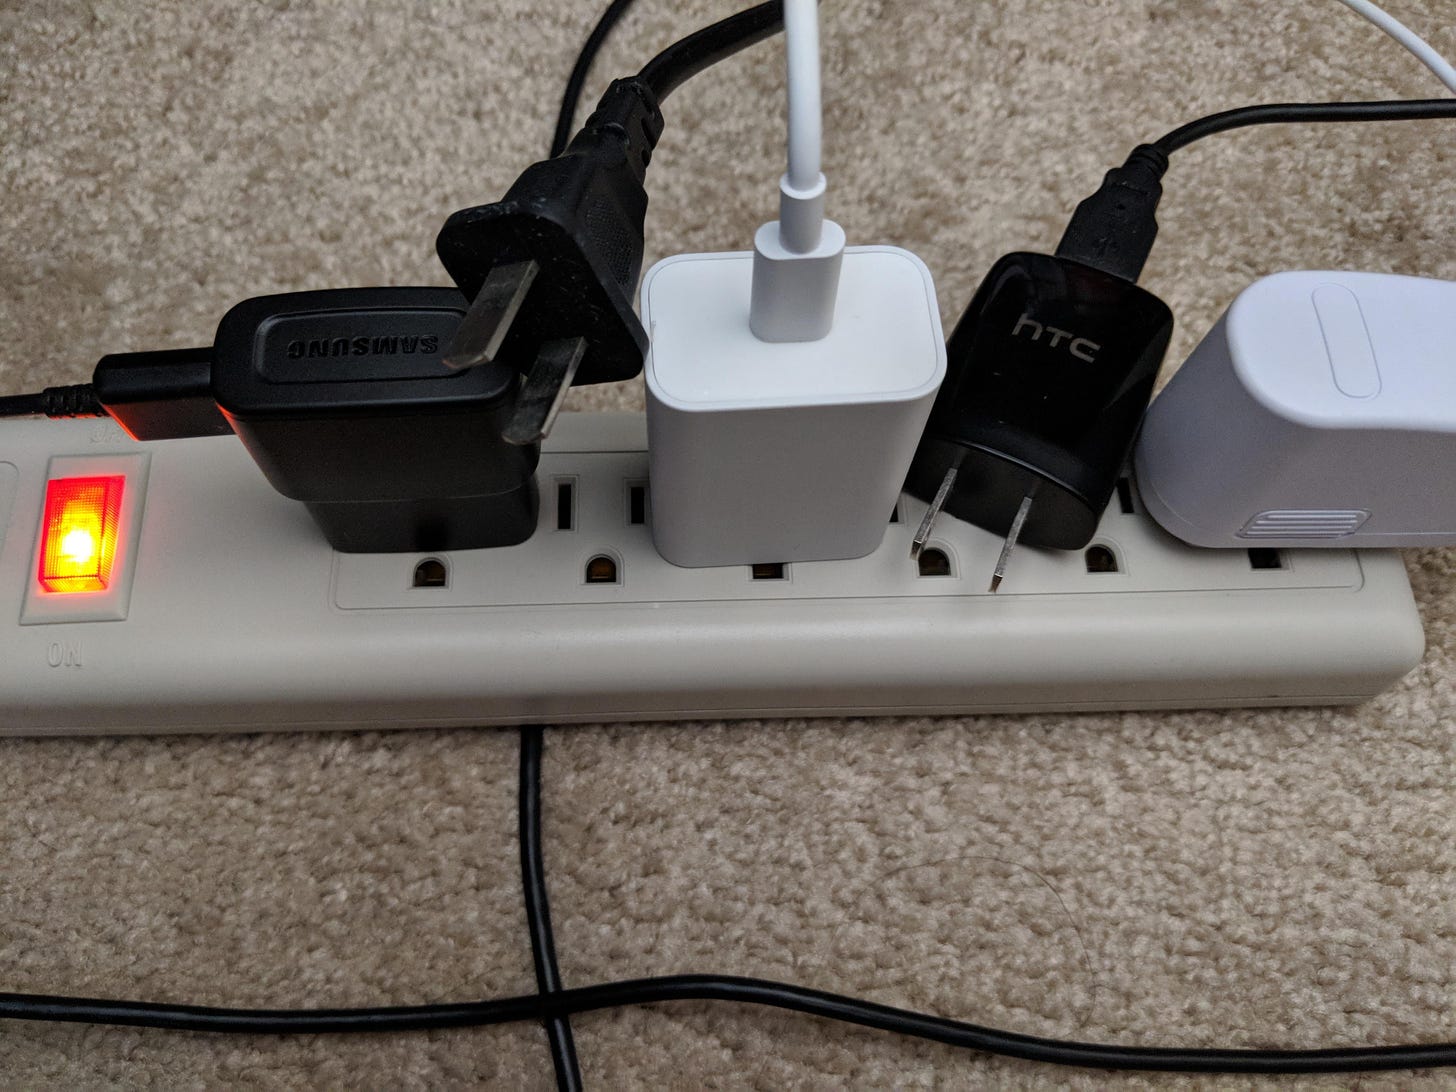 Six plugs power strip can't fit five plugs. : r/CrappyDesign